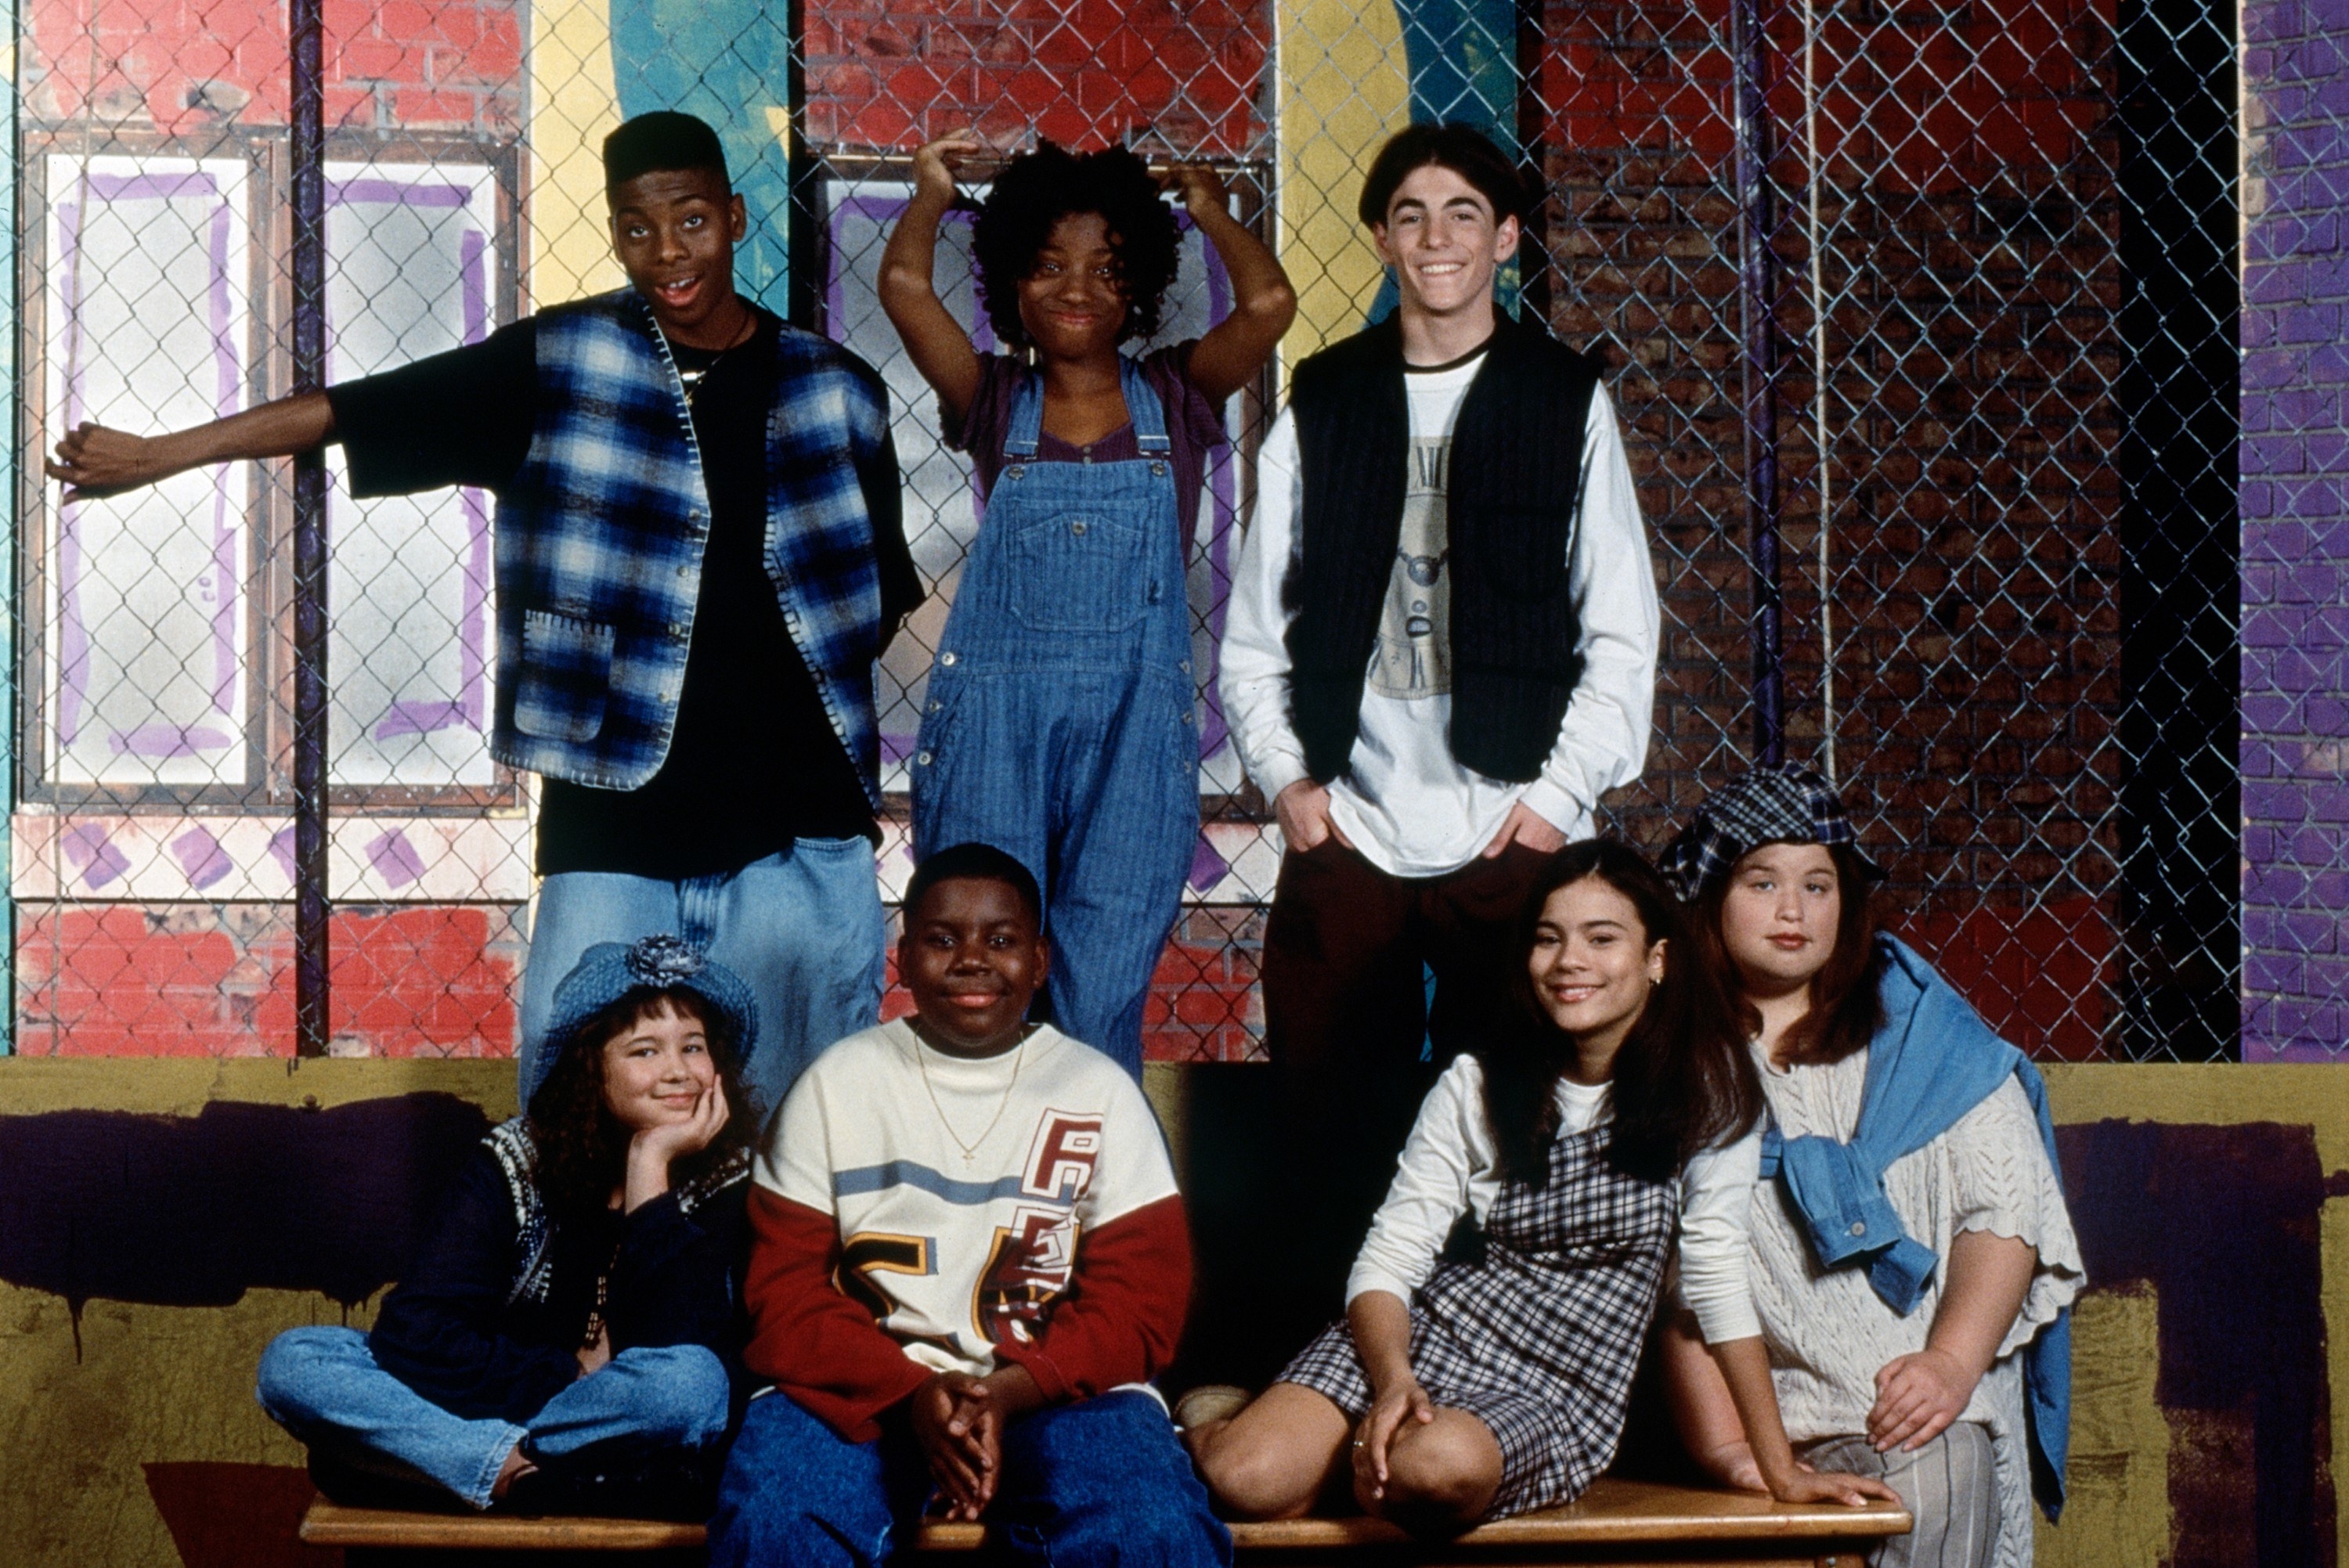 A throwback of the All That cast smiling for a group photo on set